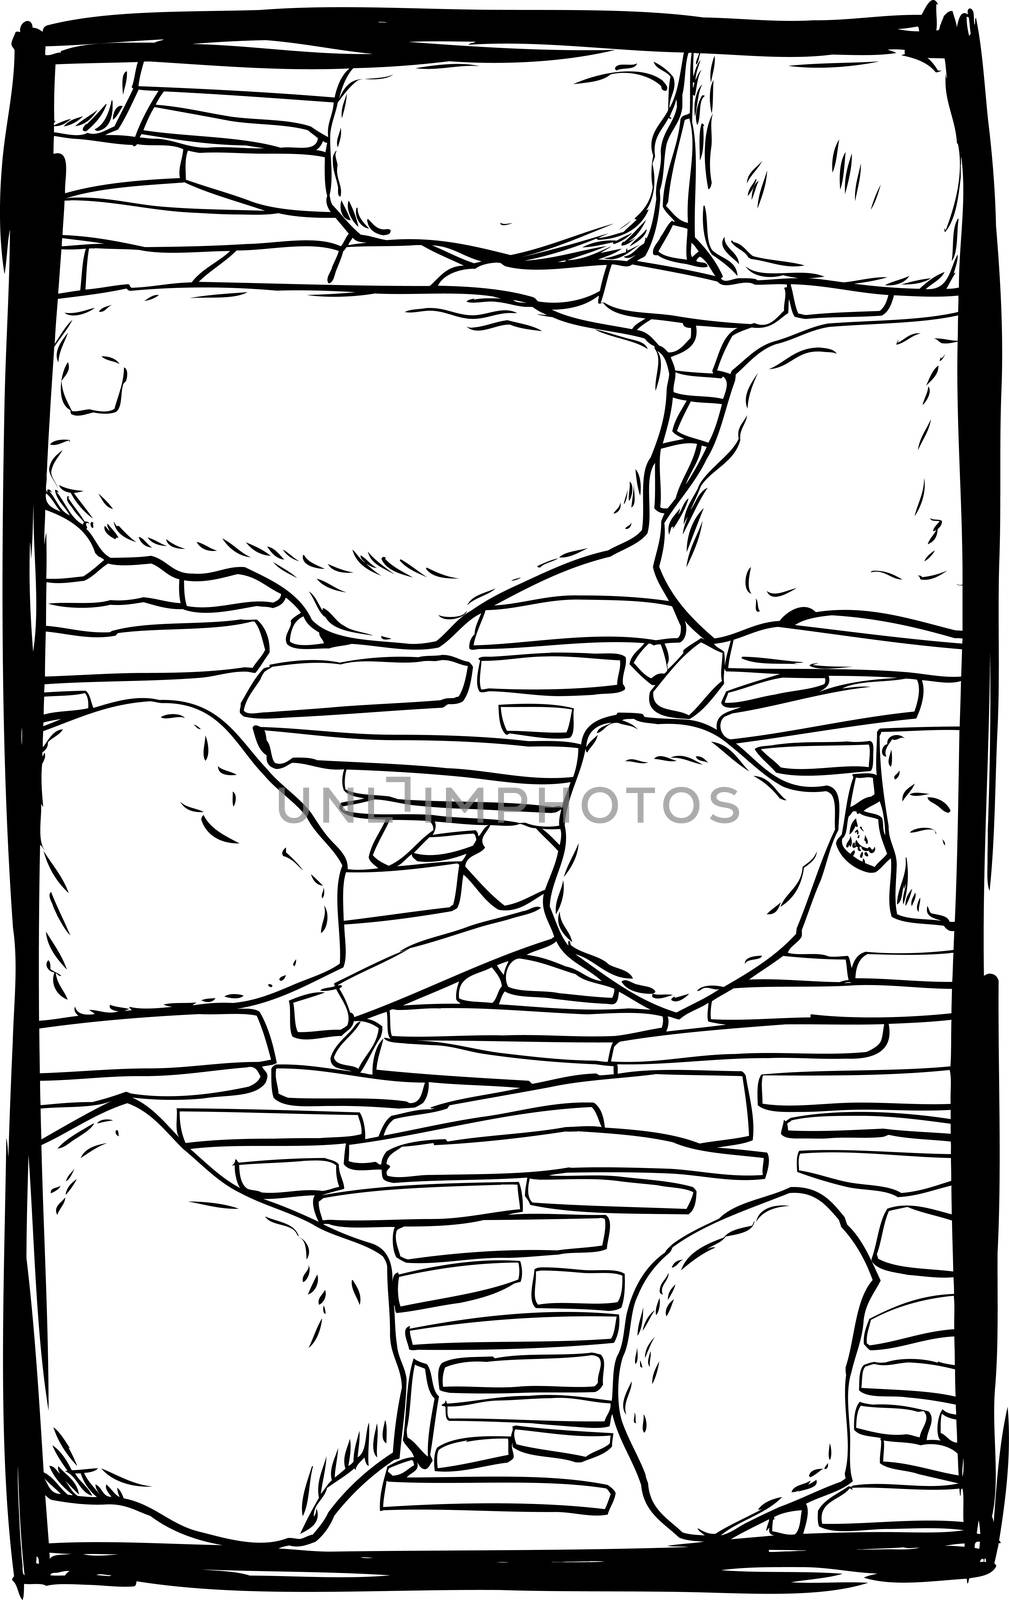 Outlined old stone wall by TheBlackRhino